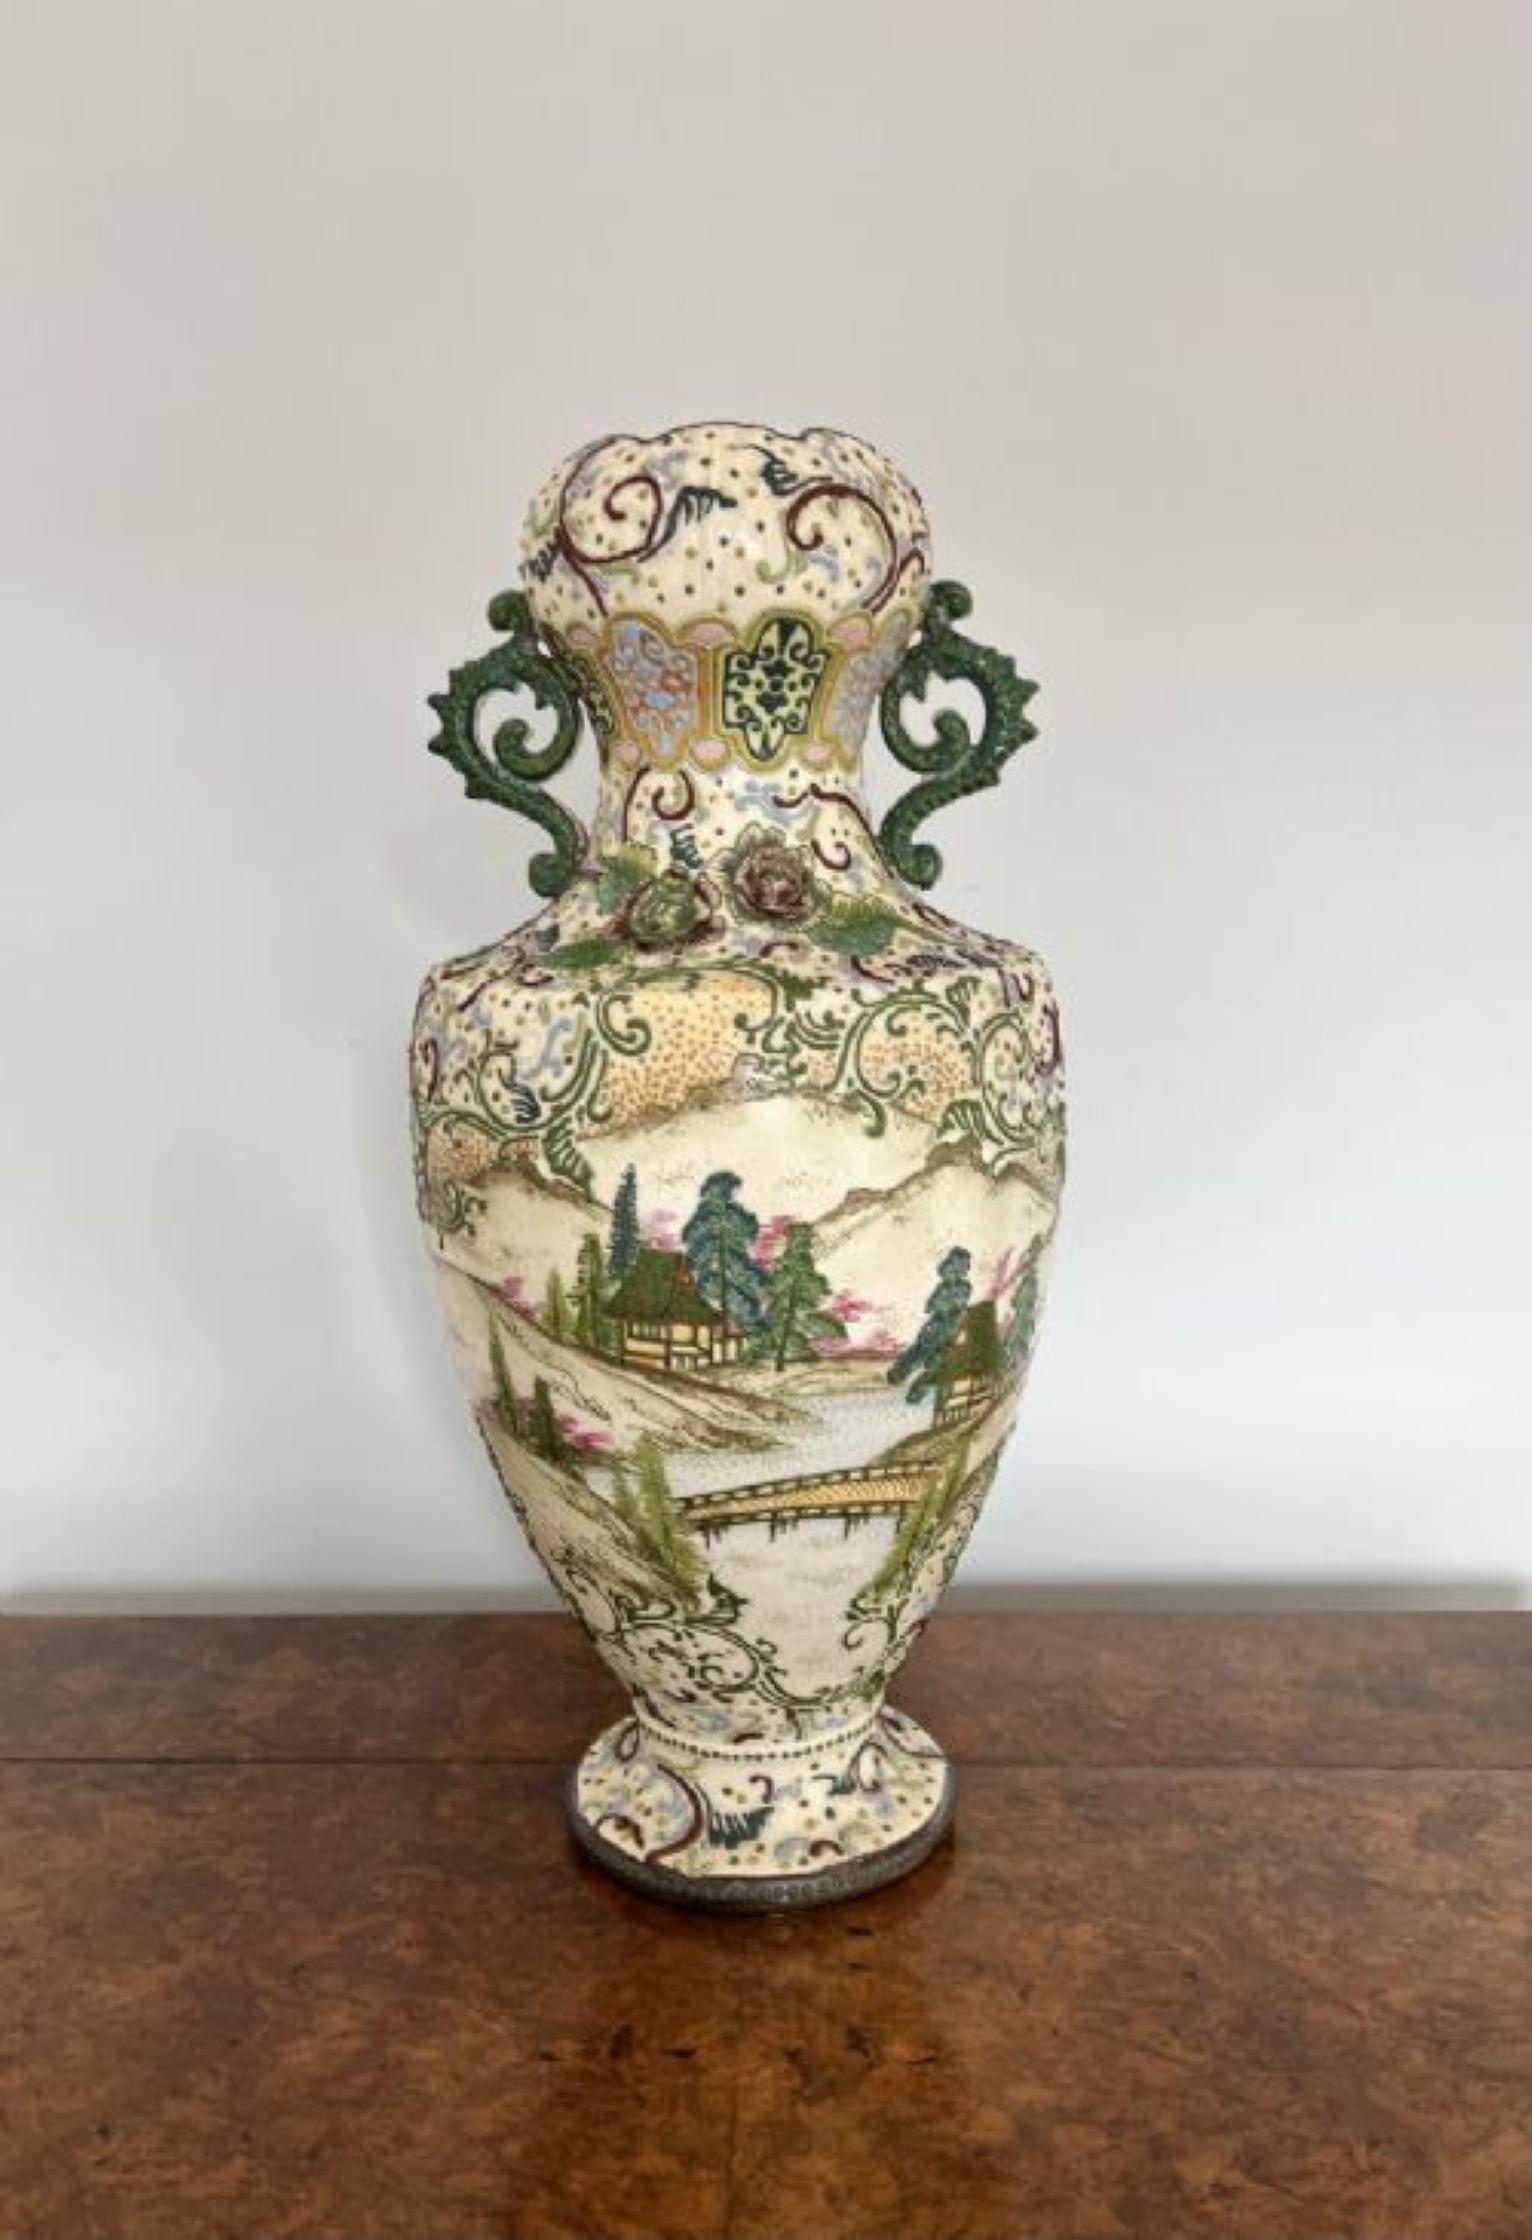 Large antique quality Satsuma vase having a large antique Japanese quality satsuma vase with quality hand painted decoration with scenes of trees, mountains, houses, bridges and scrolls in lovely green, purple, brown, blue and yellow colours with